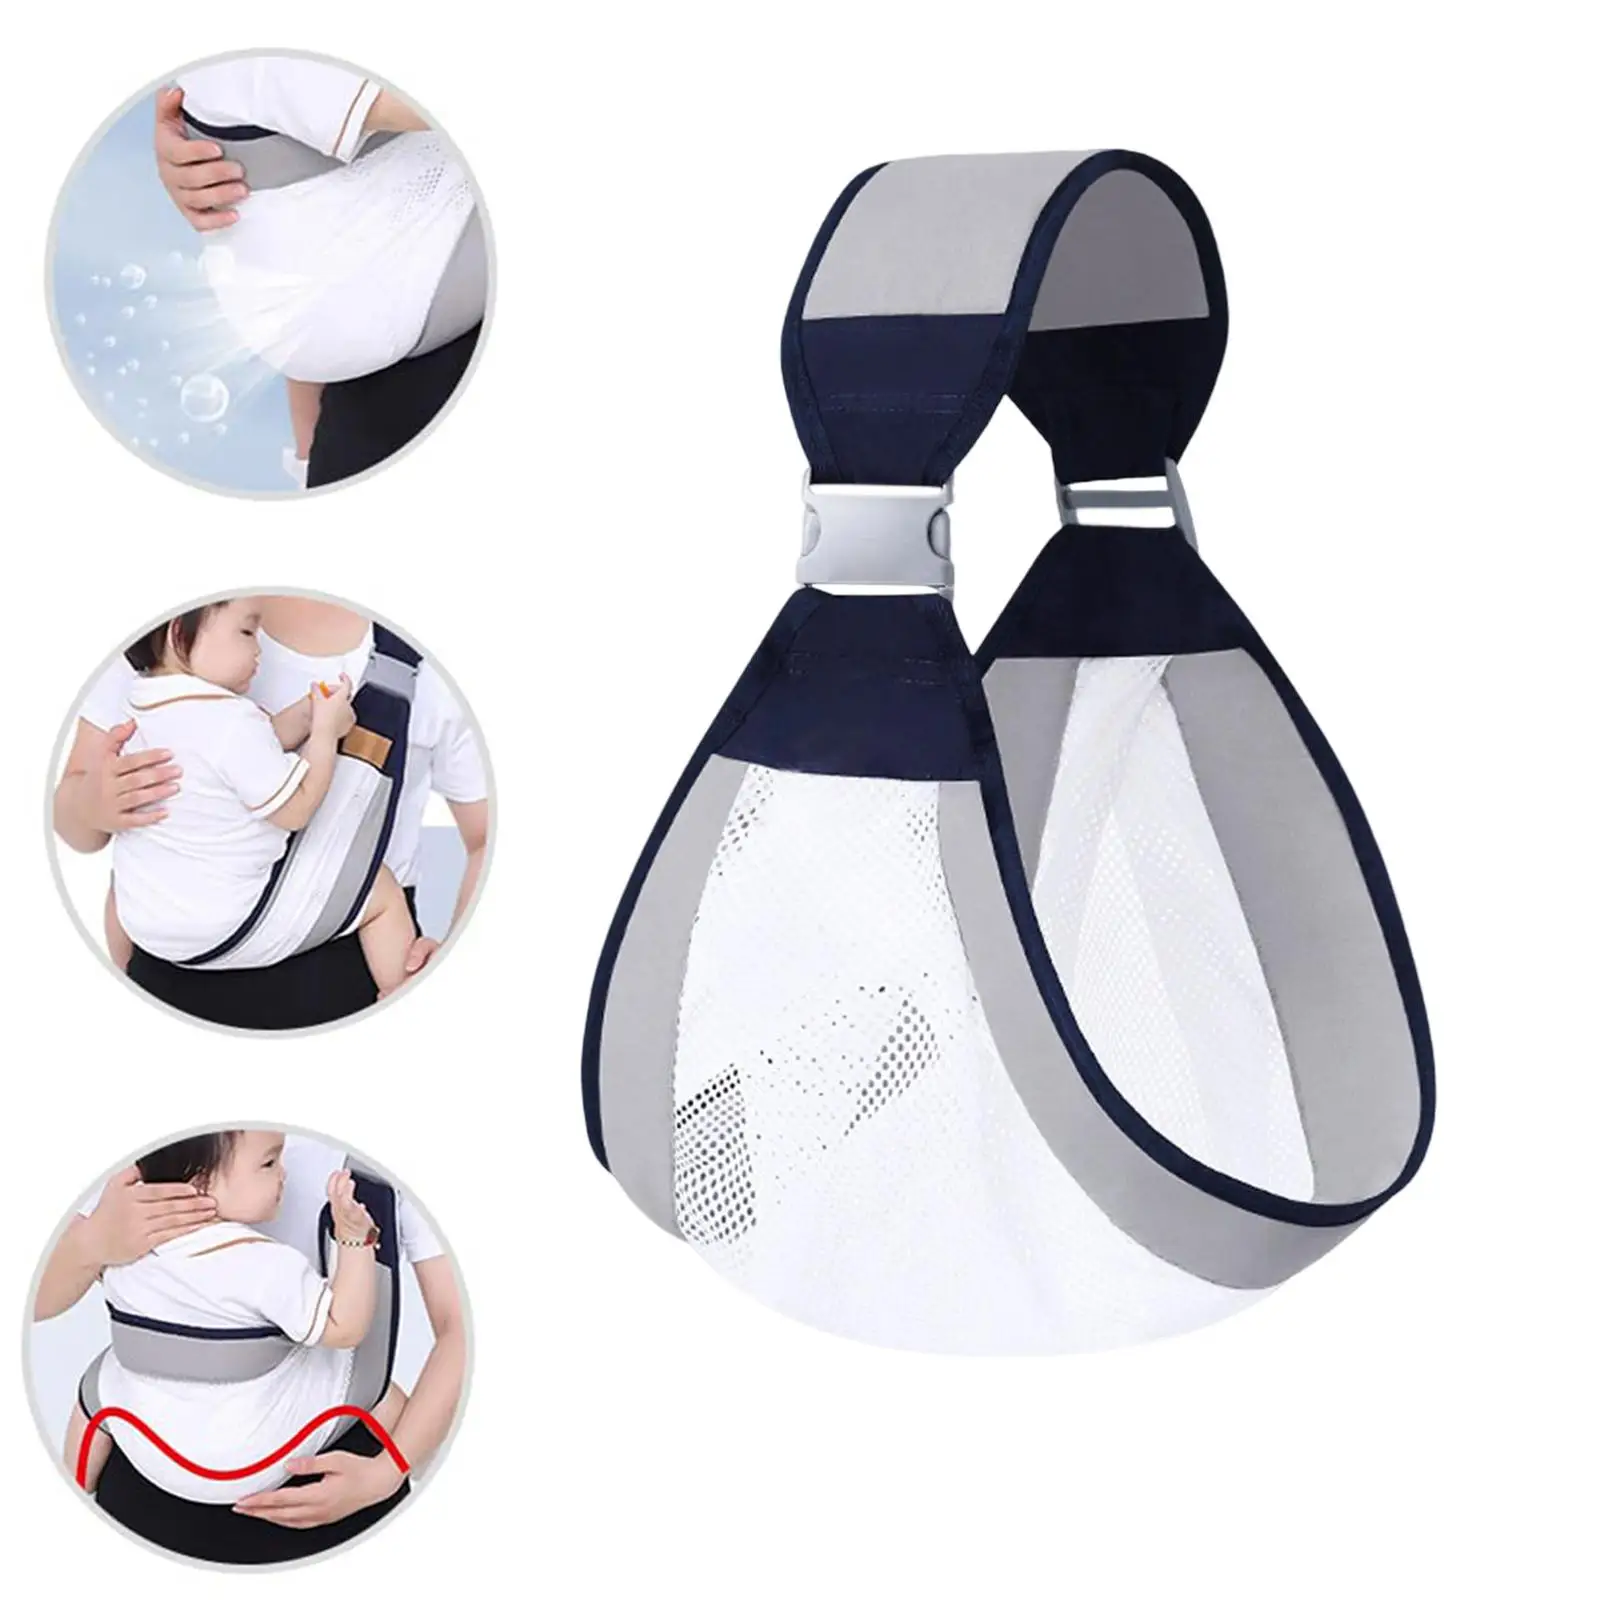 Baby Carrier Sling Breathable Soft Infant Nursing Cover Carrier with Clip